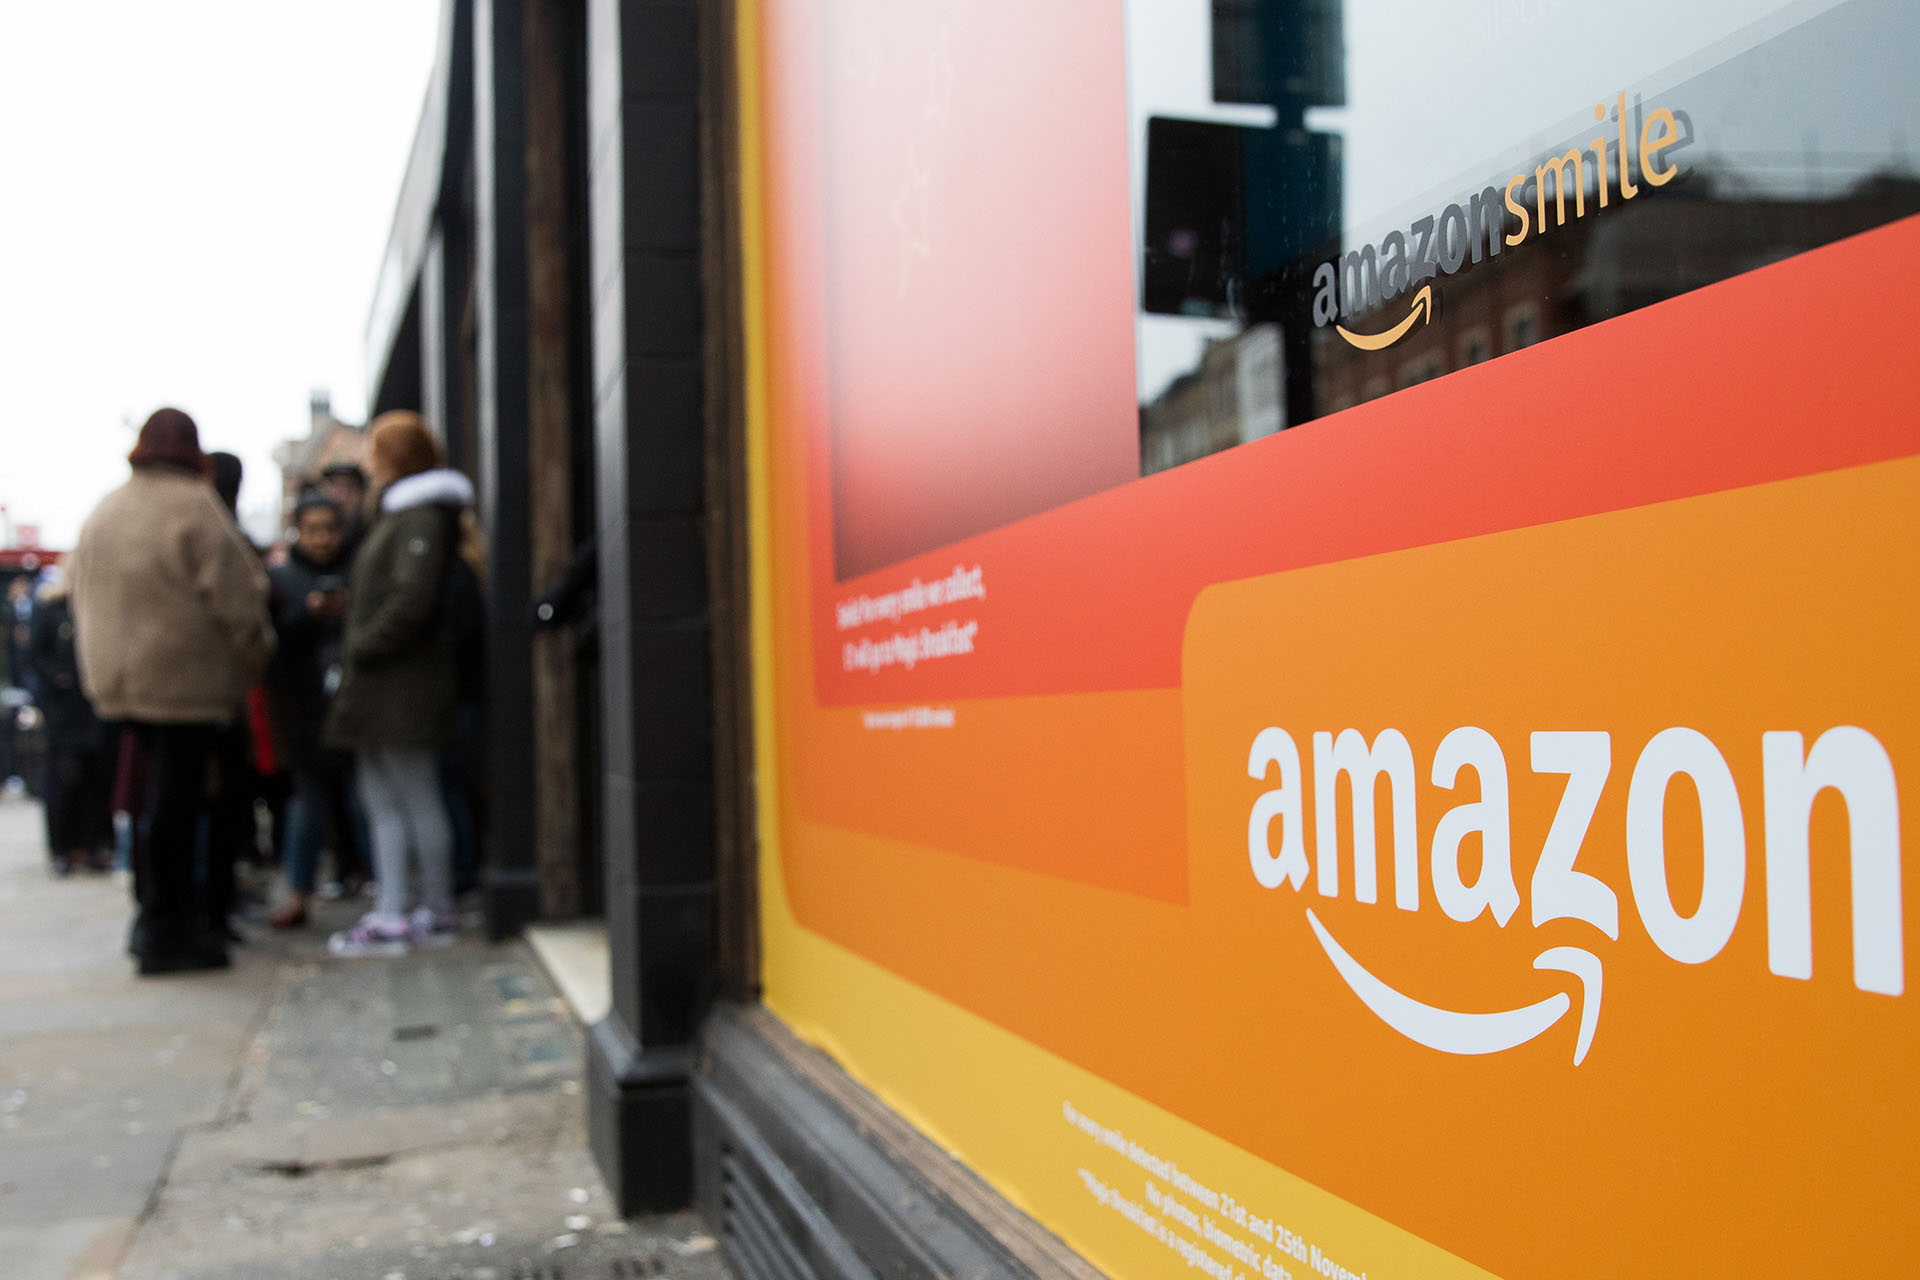 Shoppers queue to enter the Amazon.com Inc. Black Friday pop-up store on Shoreditch High Street in London, U.K., on Thursday, Nov. 22, 2018. Deloitte expects sales from November to January to rise as much as 5.6 percent, to more than $1.1 trillion, marking the best holiday period in recent memory. Photographer: Chris Ratcliffe/Bloomberg